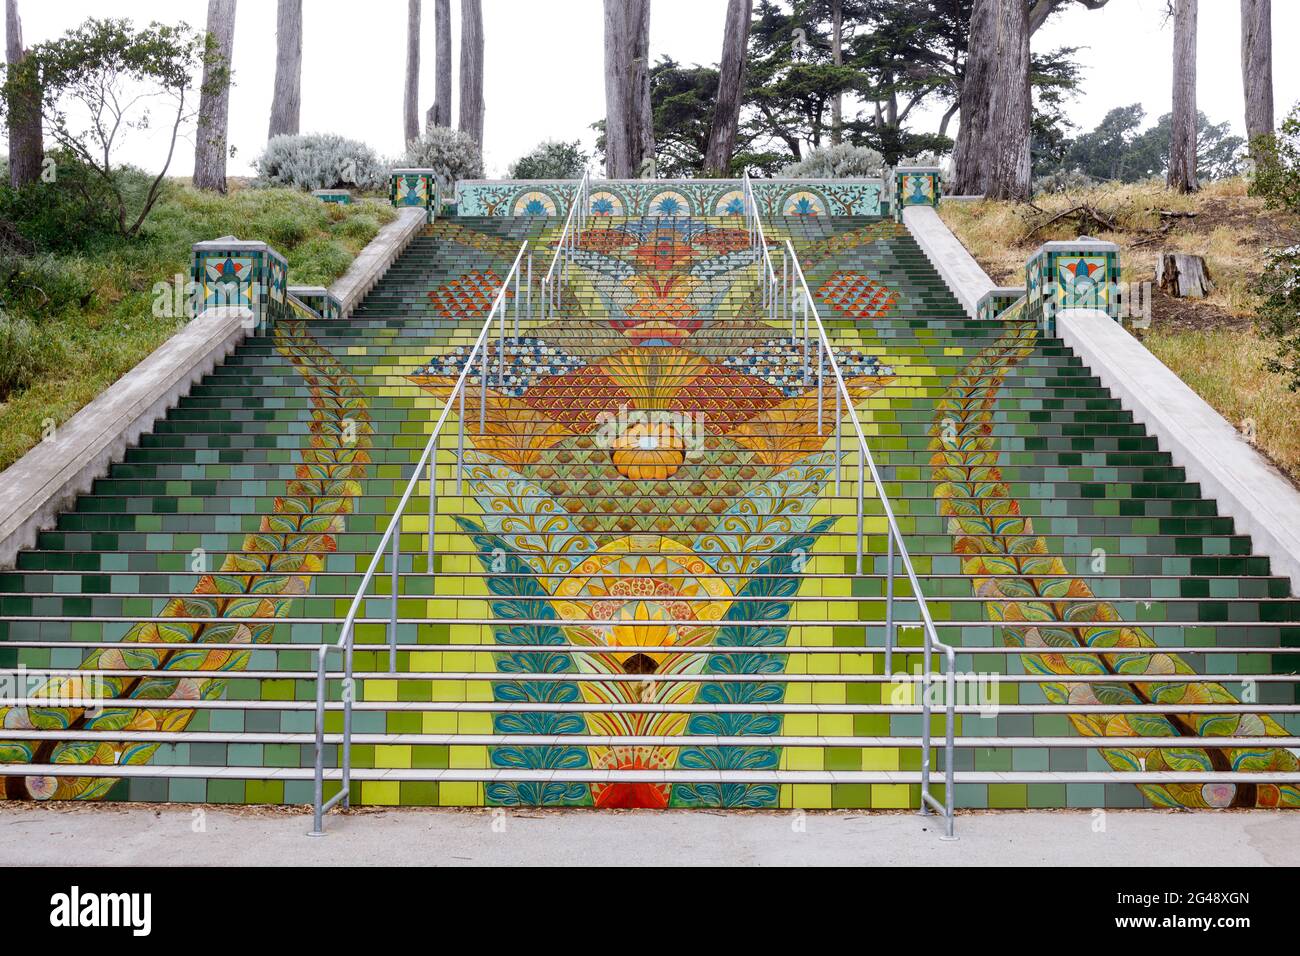 Lincoln Park Steps. Installation of art mosaic tiles on the edge of Lincoln Park in San Francisco. Stock Photo